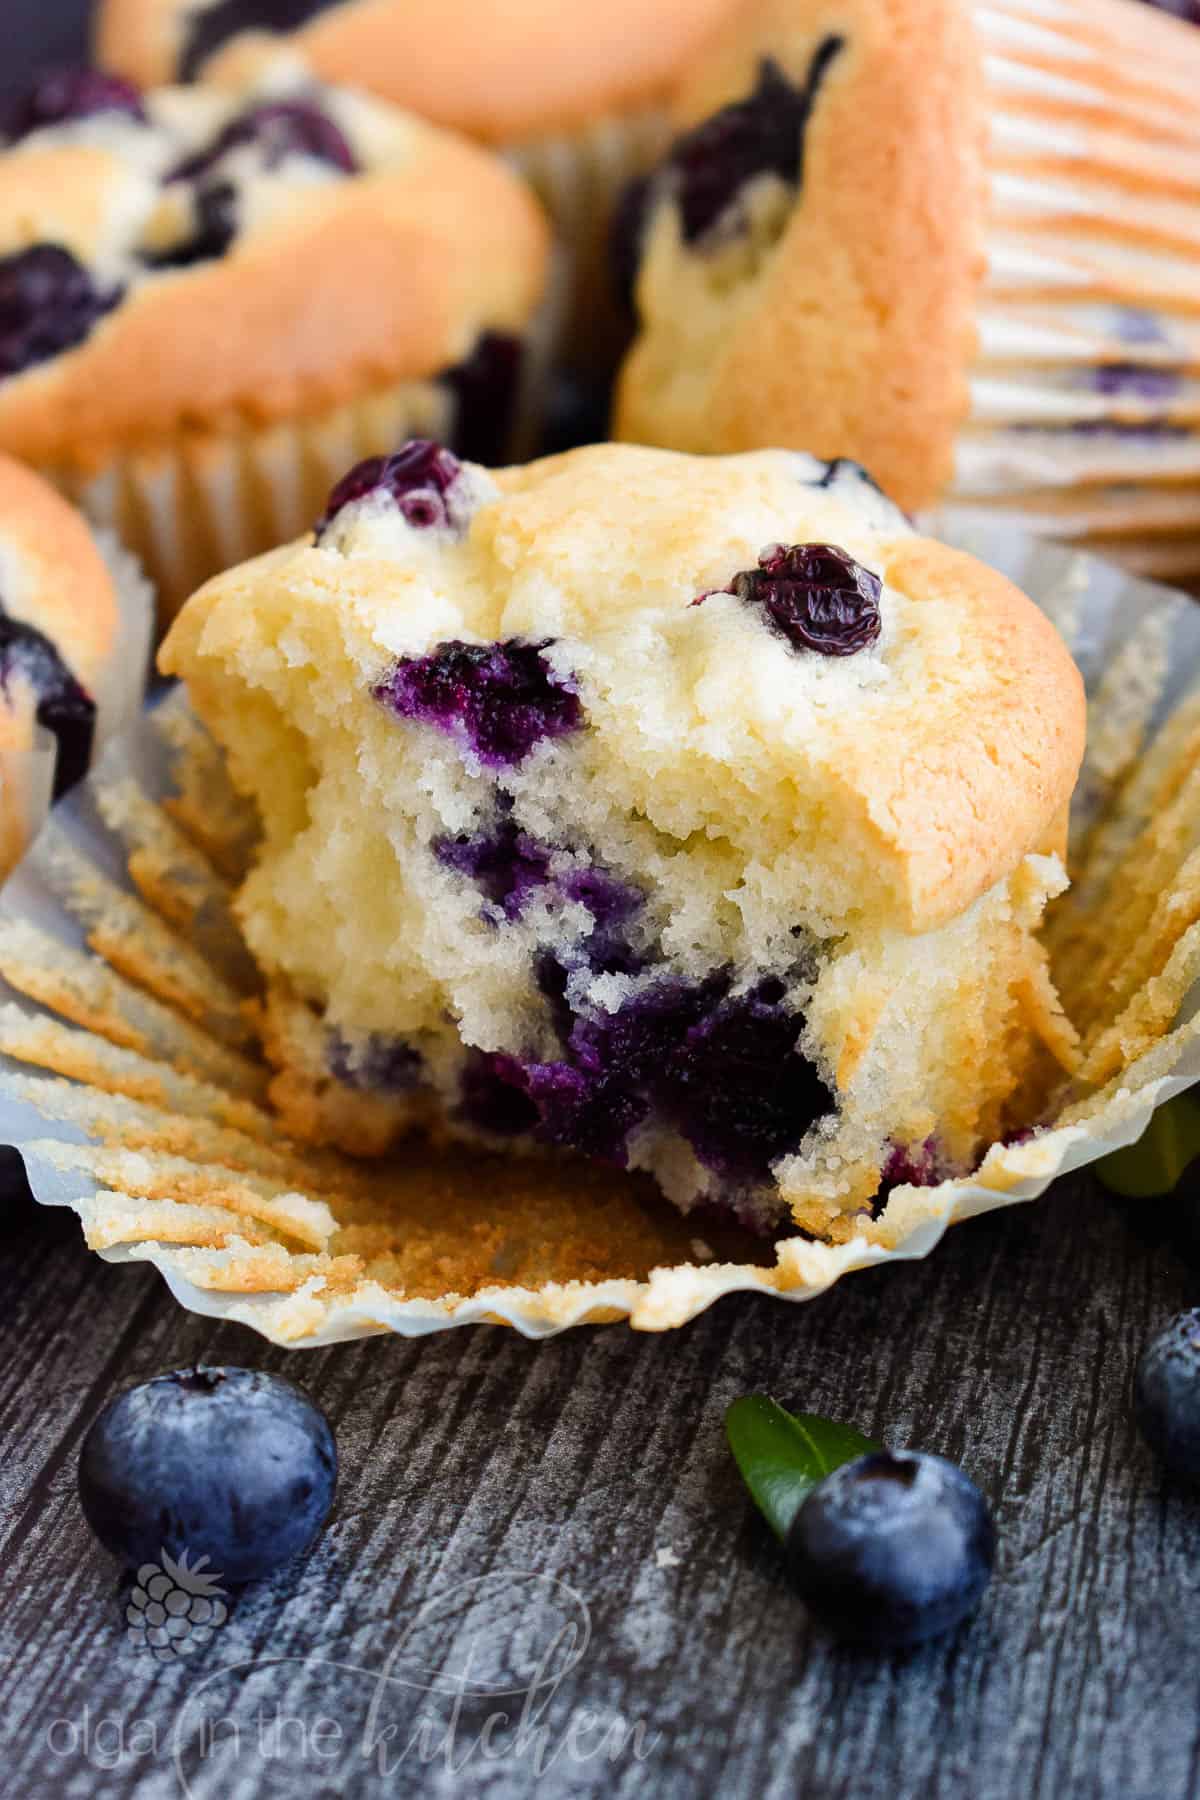 These Sour Cream Blueberry Muffins are bursting with sweet and fresh blueberry flavor. They are soft and perfectly moist on the inside with perfectly golden brown top. #blueberrymuffins #muffins #olgainthekitchen #breakfast #dessert #summer #bread #easyrecipe